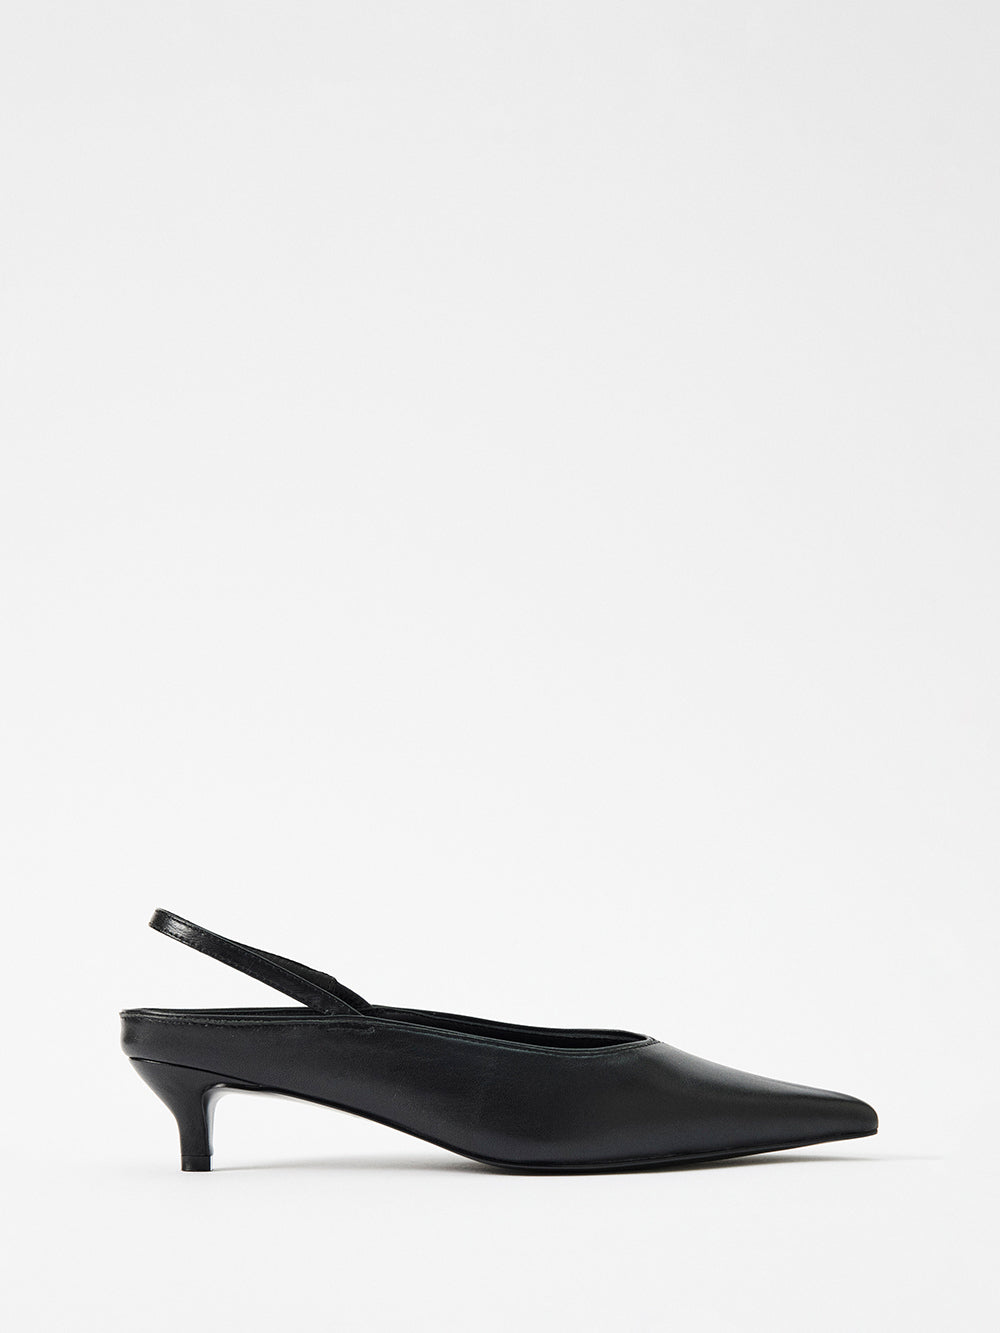 The Scout Leather Slingback